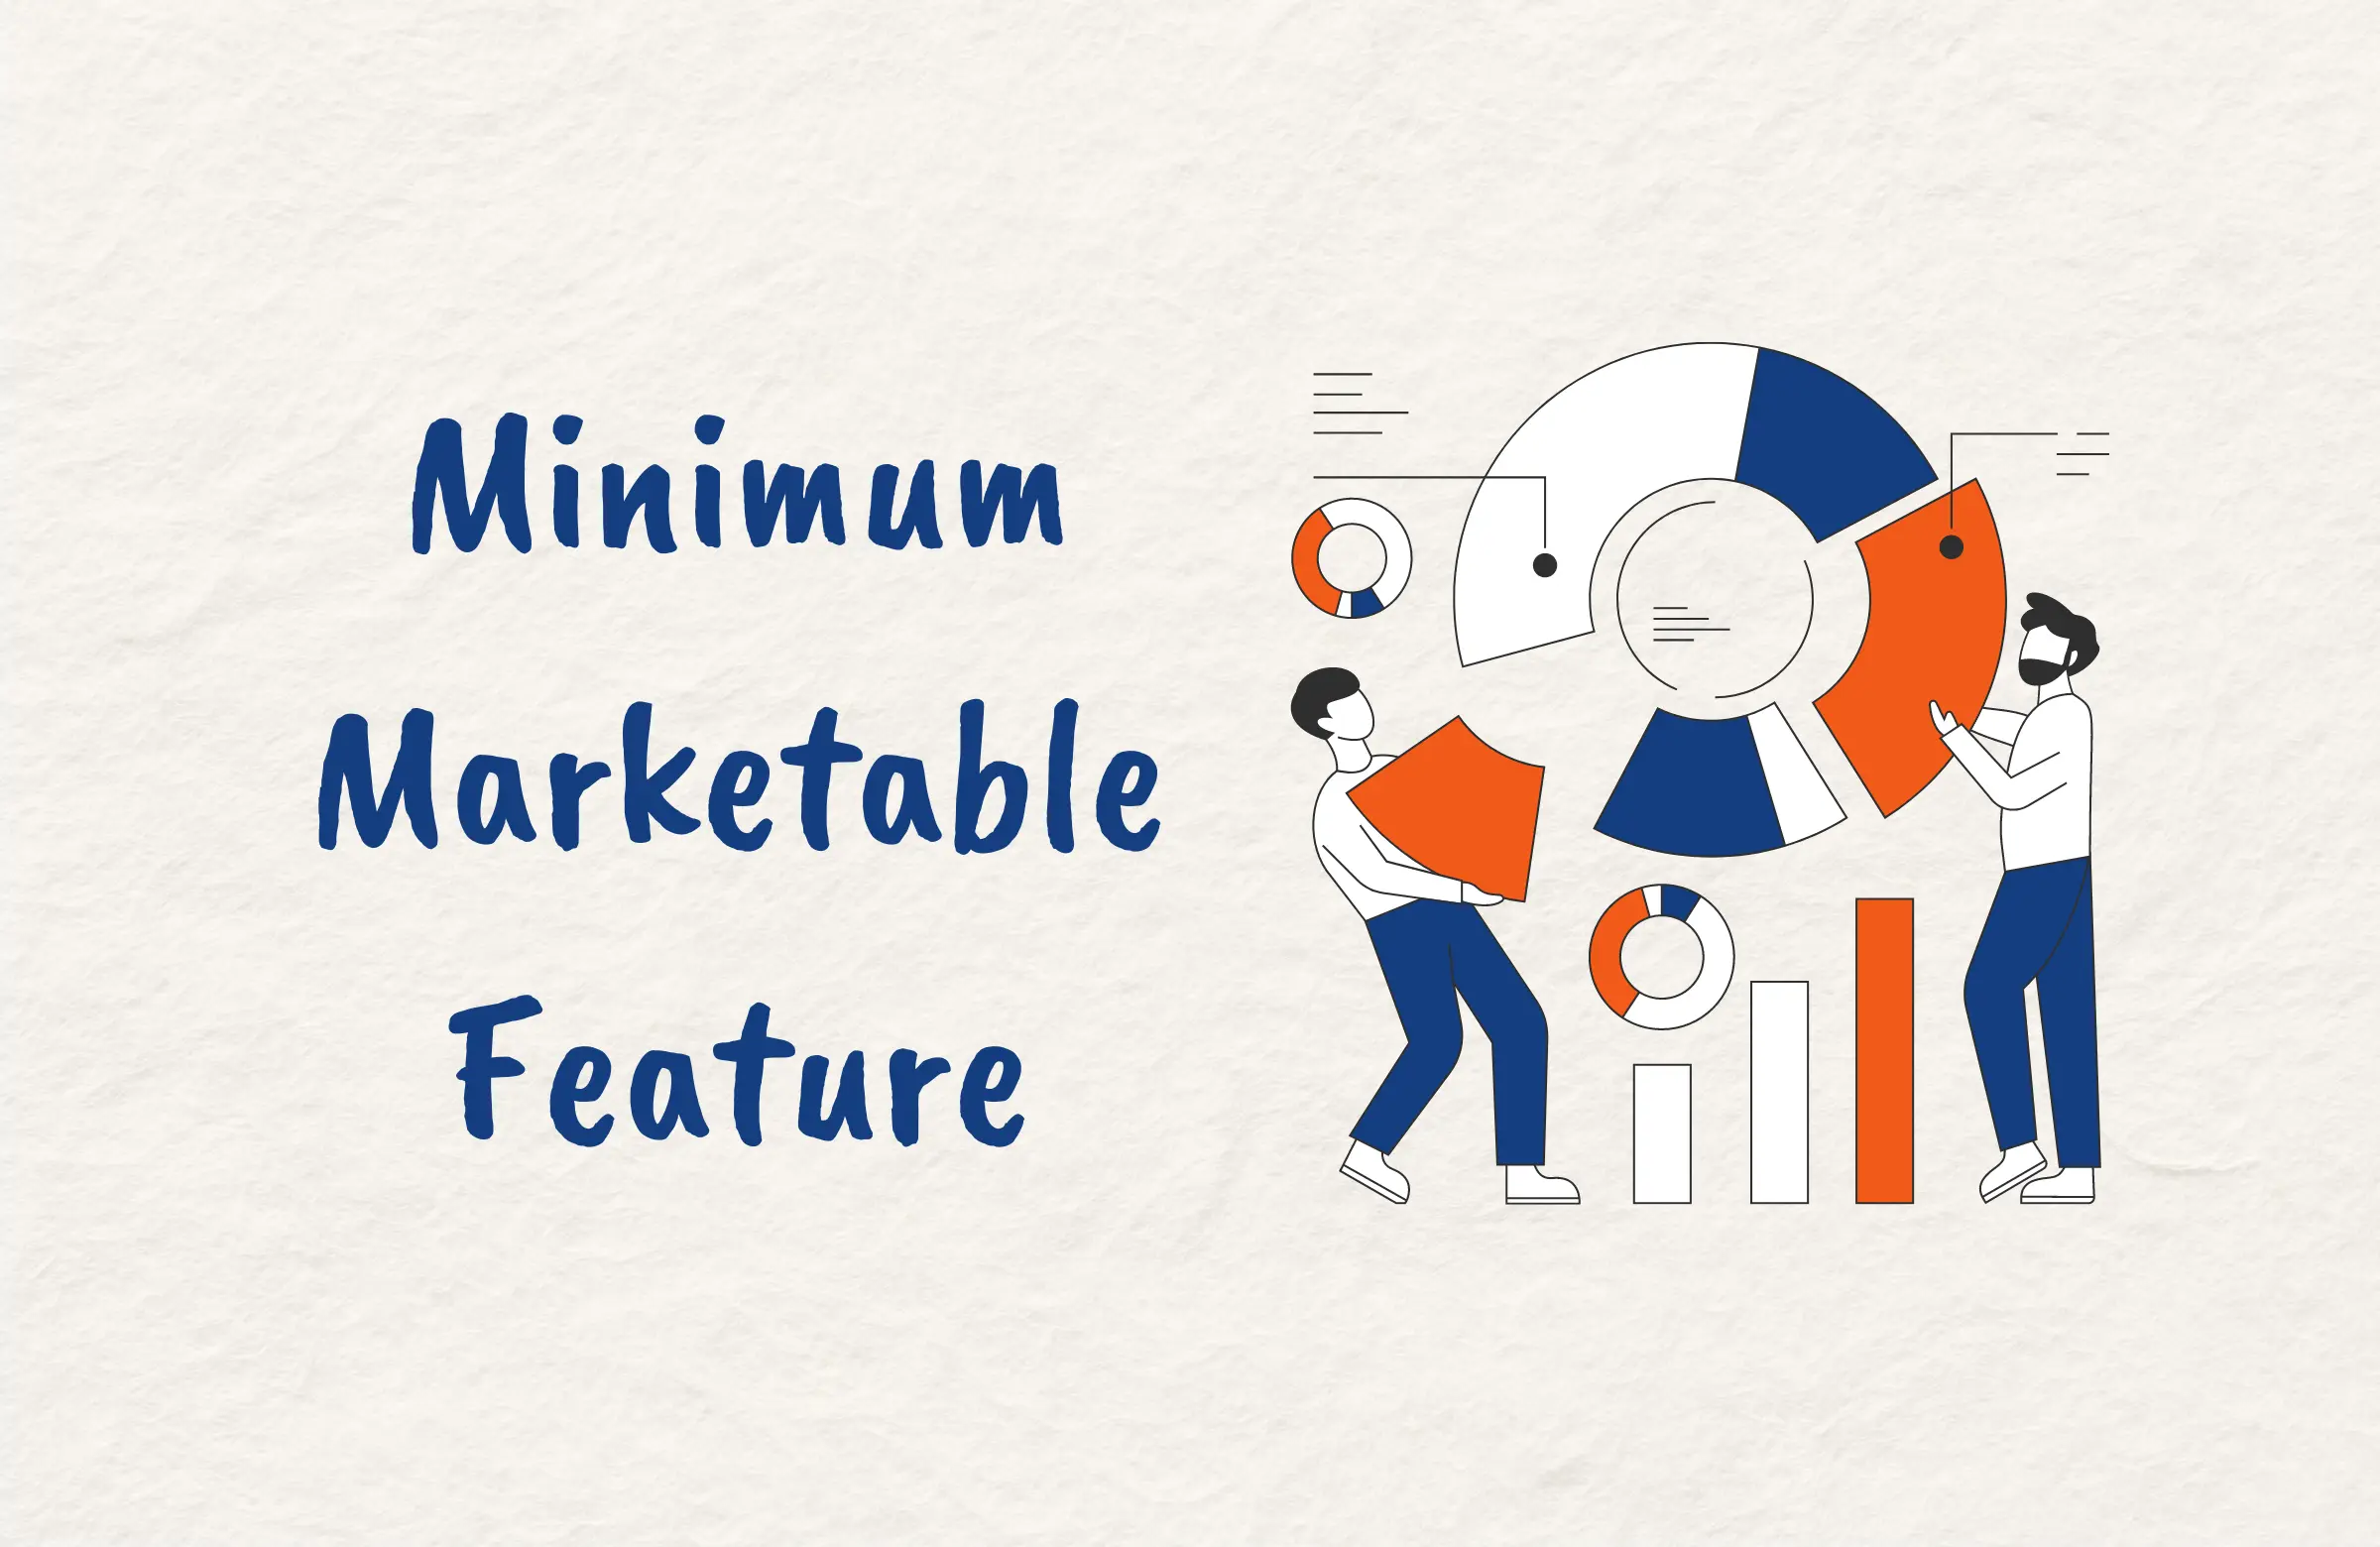 What is a Minimum Marketable Feature